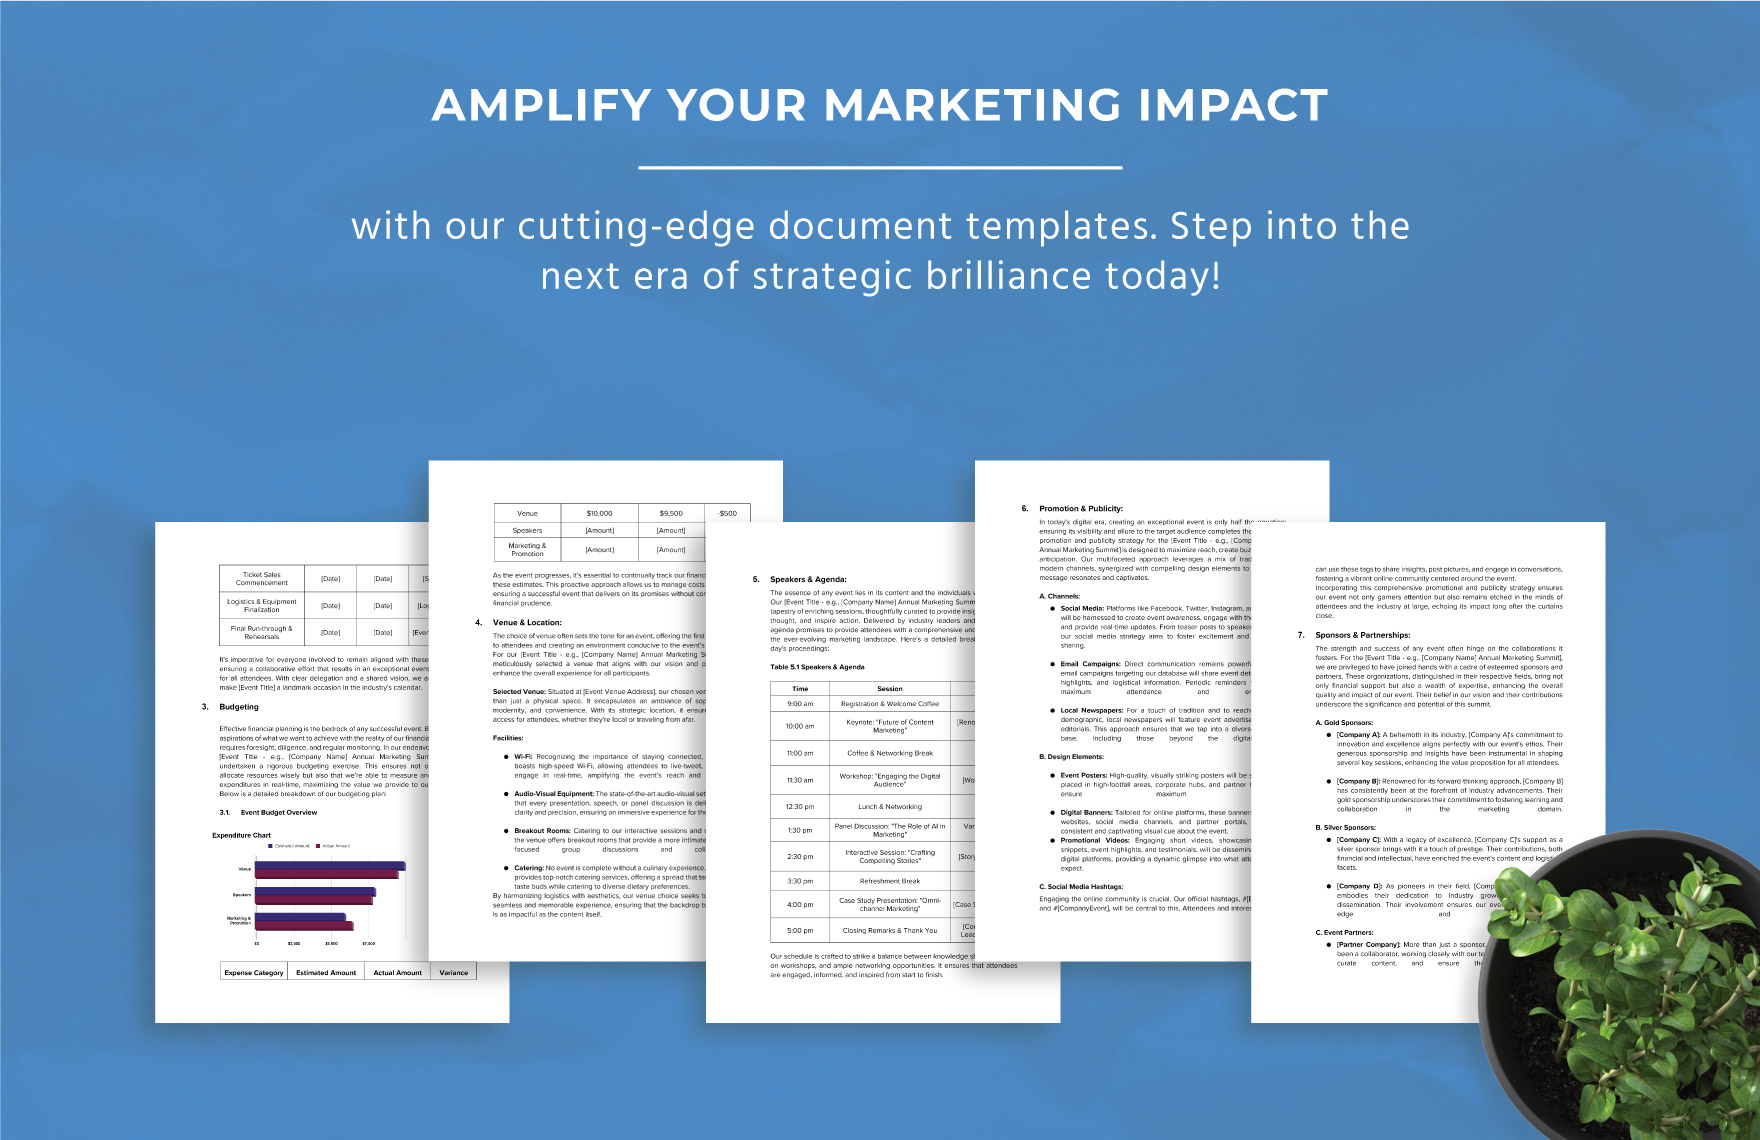 Marketing Event Planning Document Template